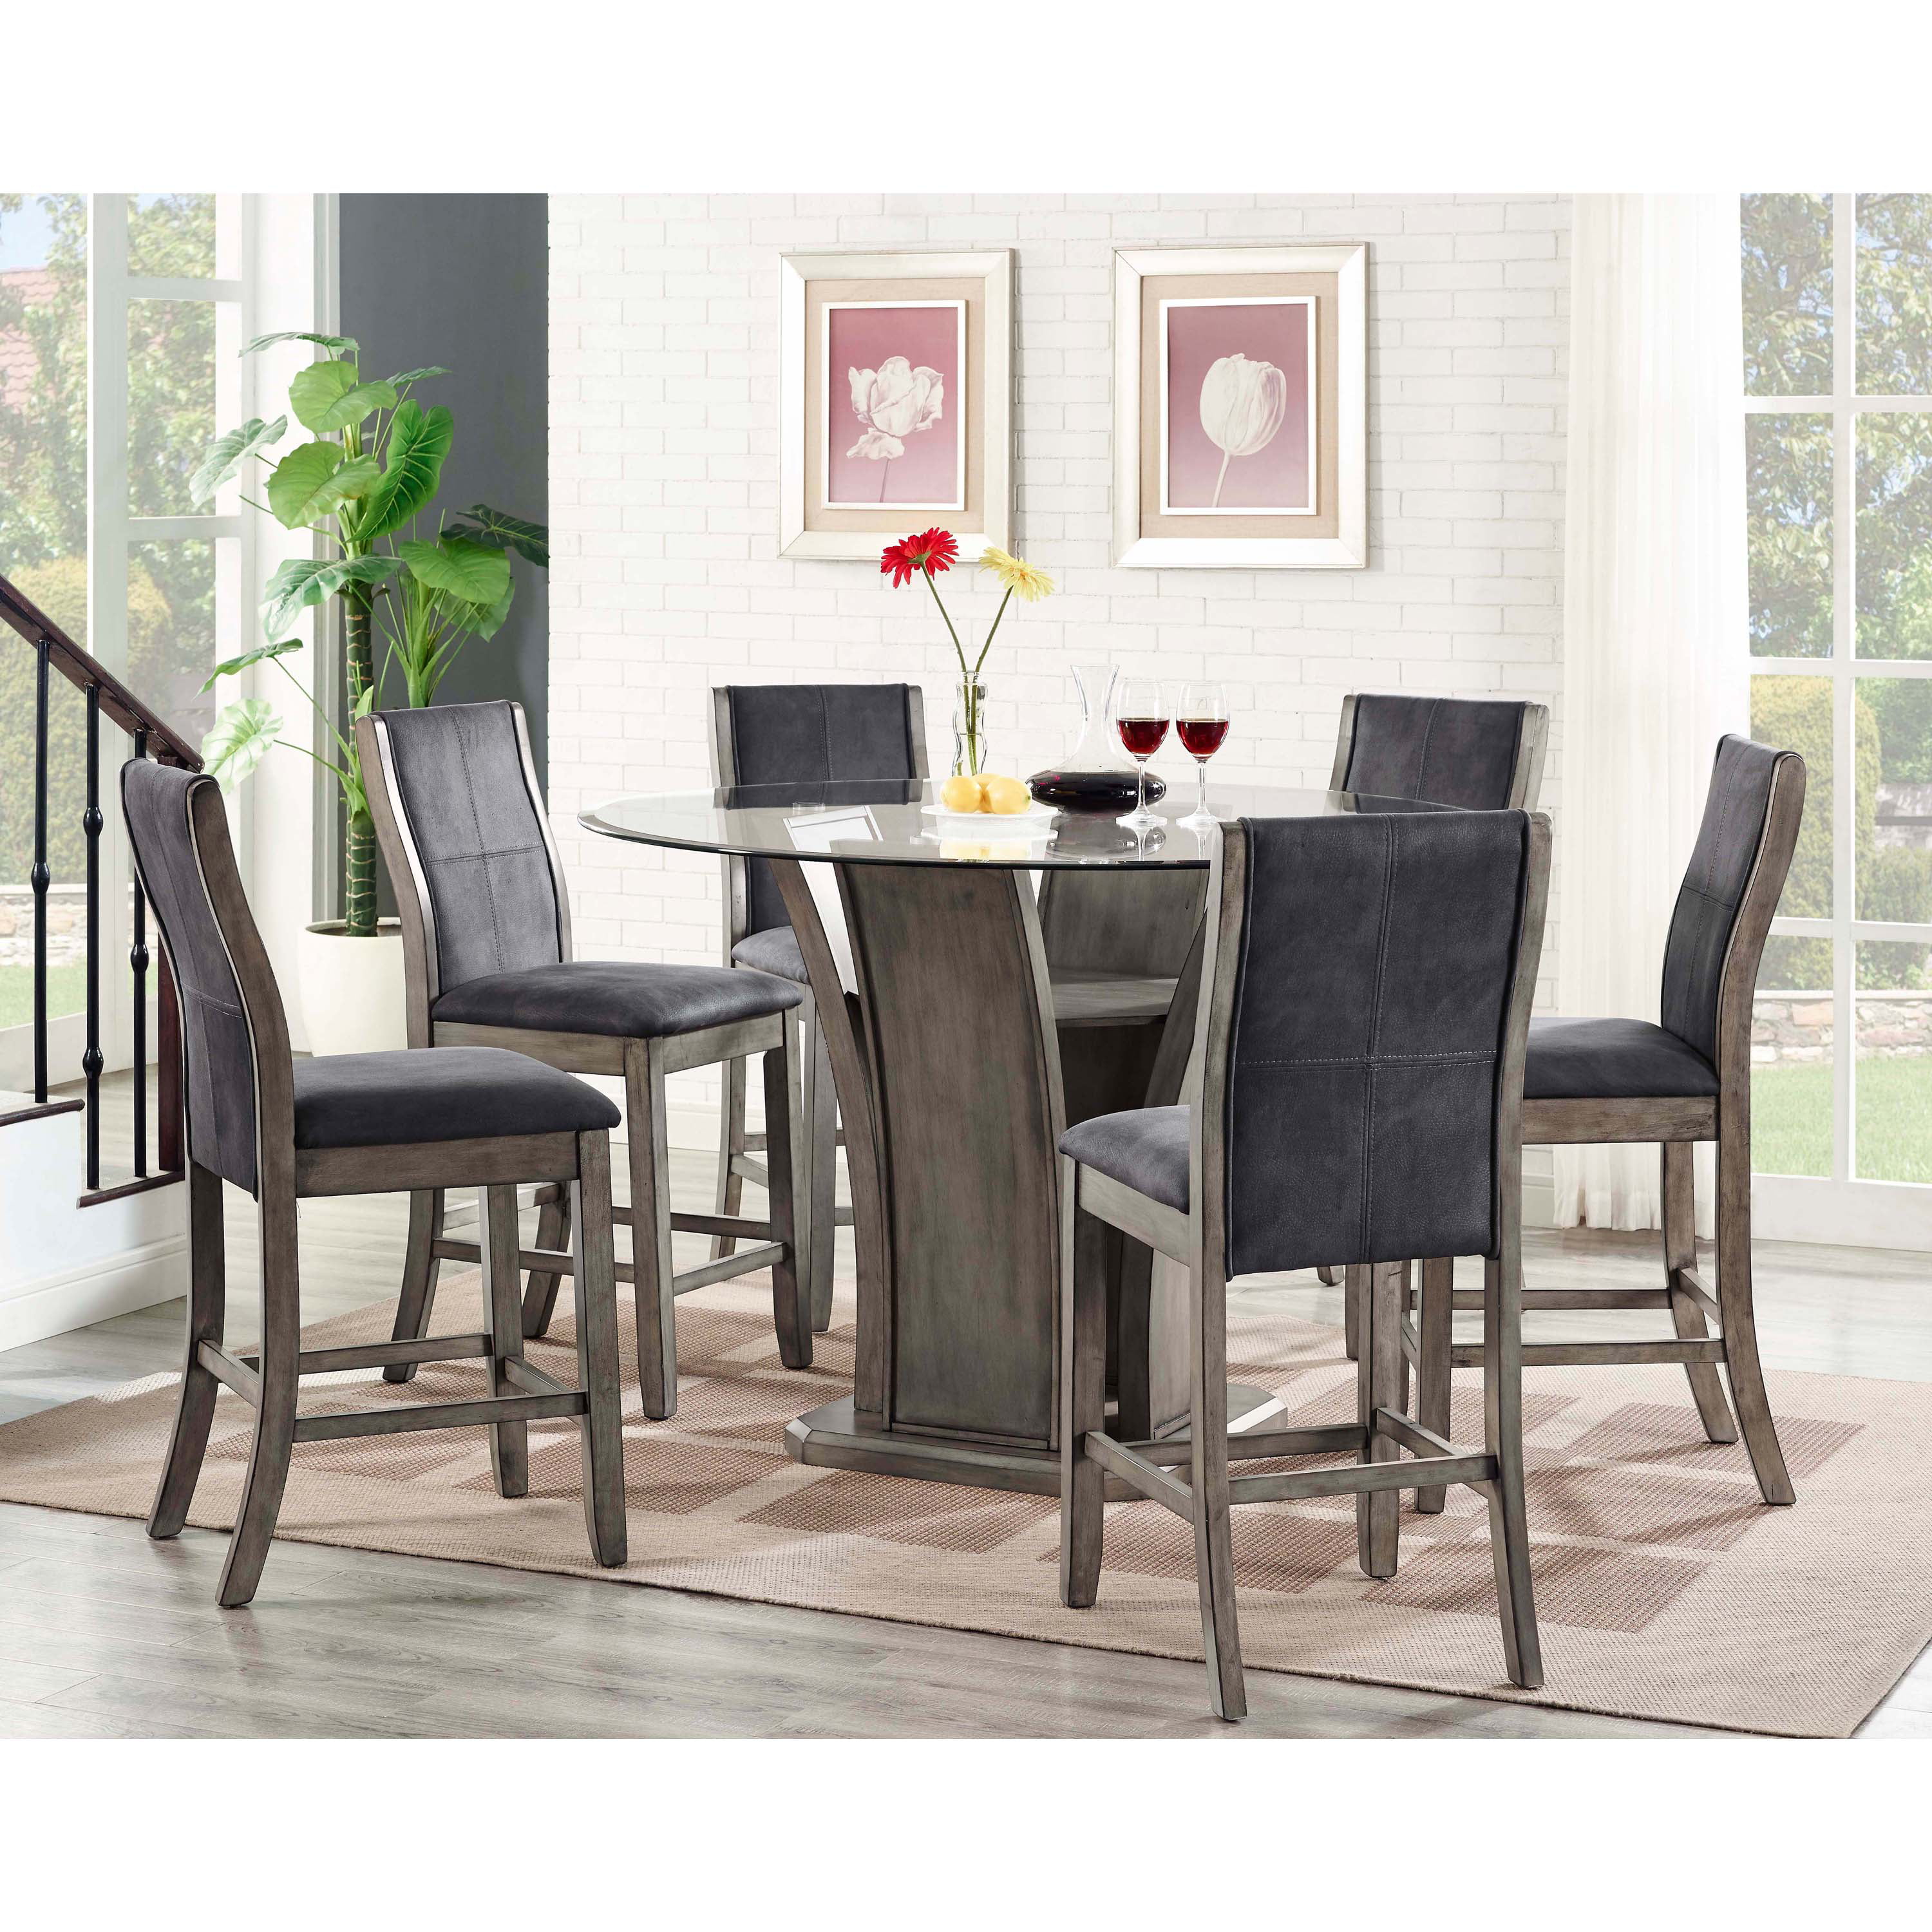 Picket House Furnishings Dylan Round Counter 7pc Dining Set, Table & 6 ...